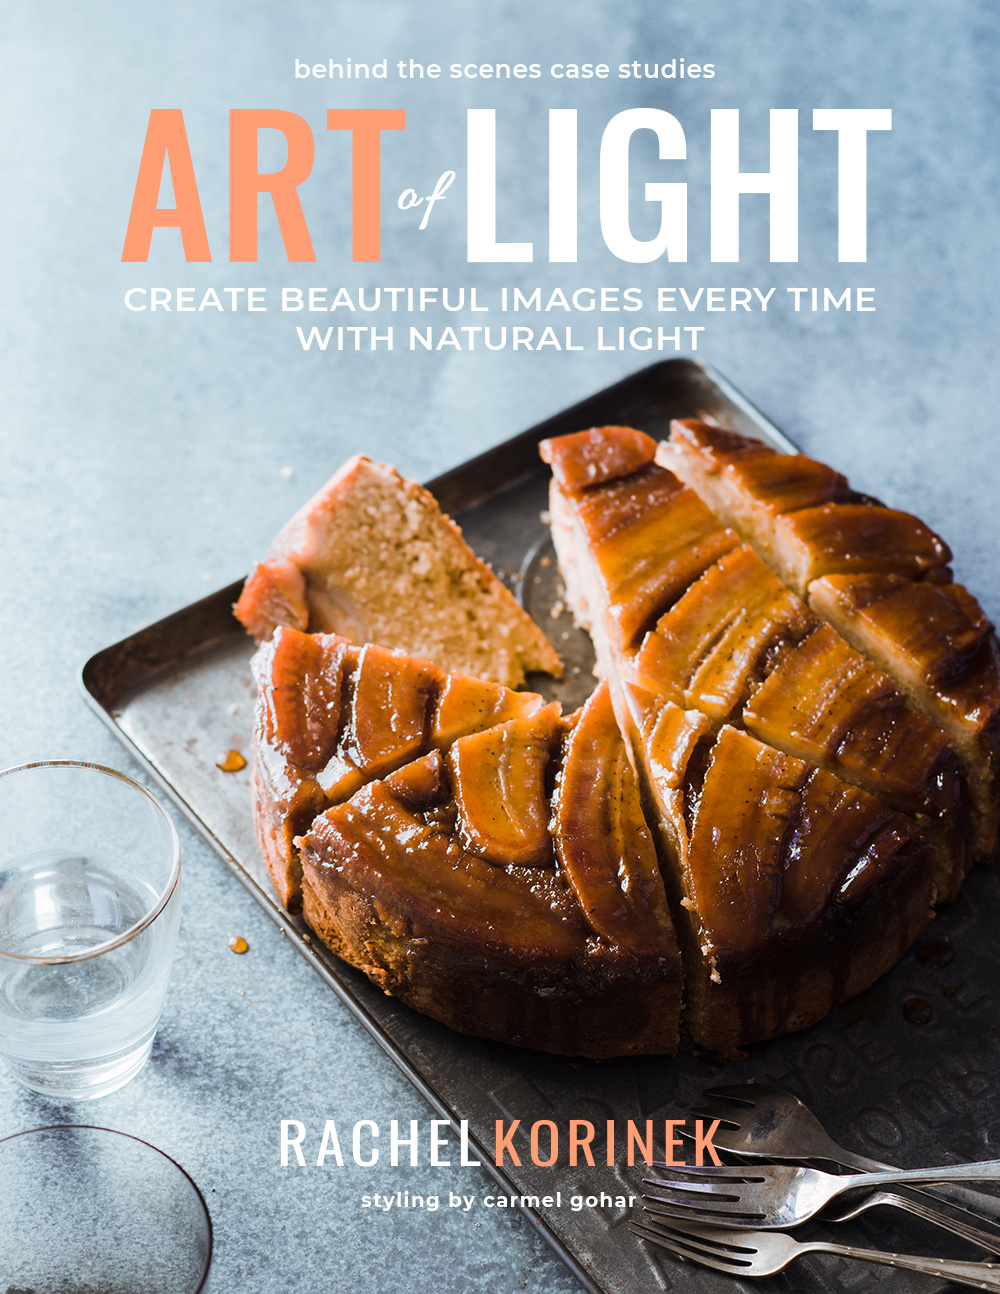 Learn How To Manipulate Natural Light (Beyond the basic level) with Rachel Korinek